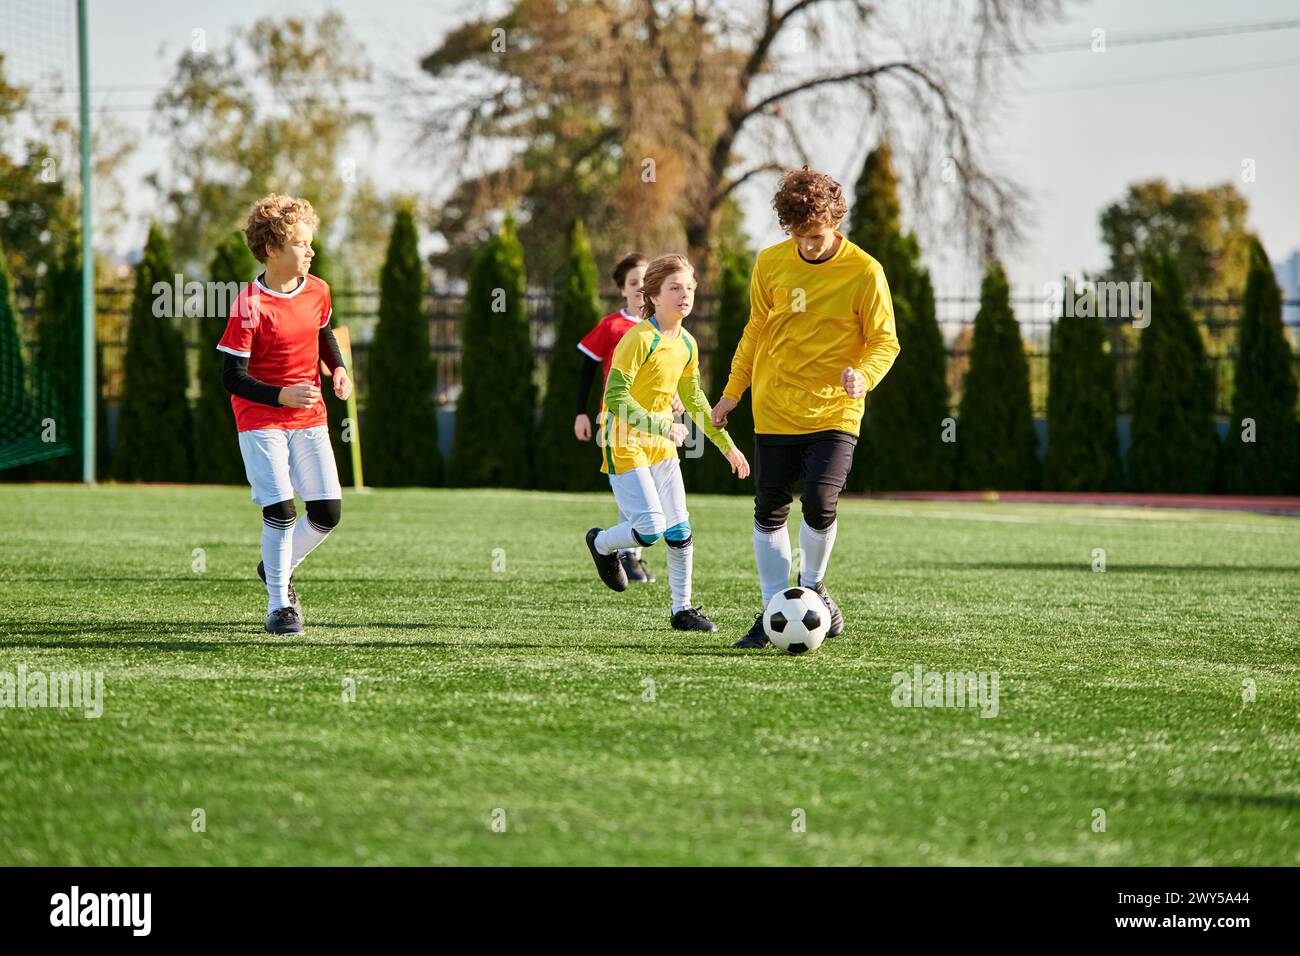 A lively group of young children joyfully playing a game of soccer on a green field. They are running, kicking the ball, and shouting with excitement Stock Photo